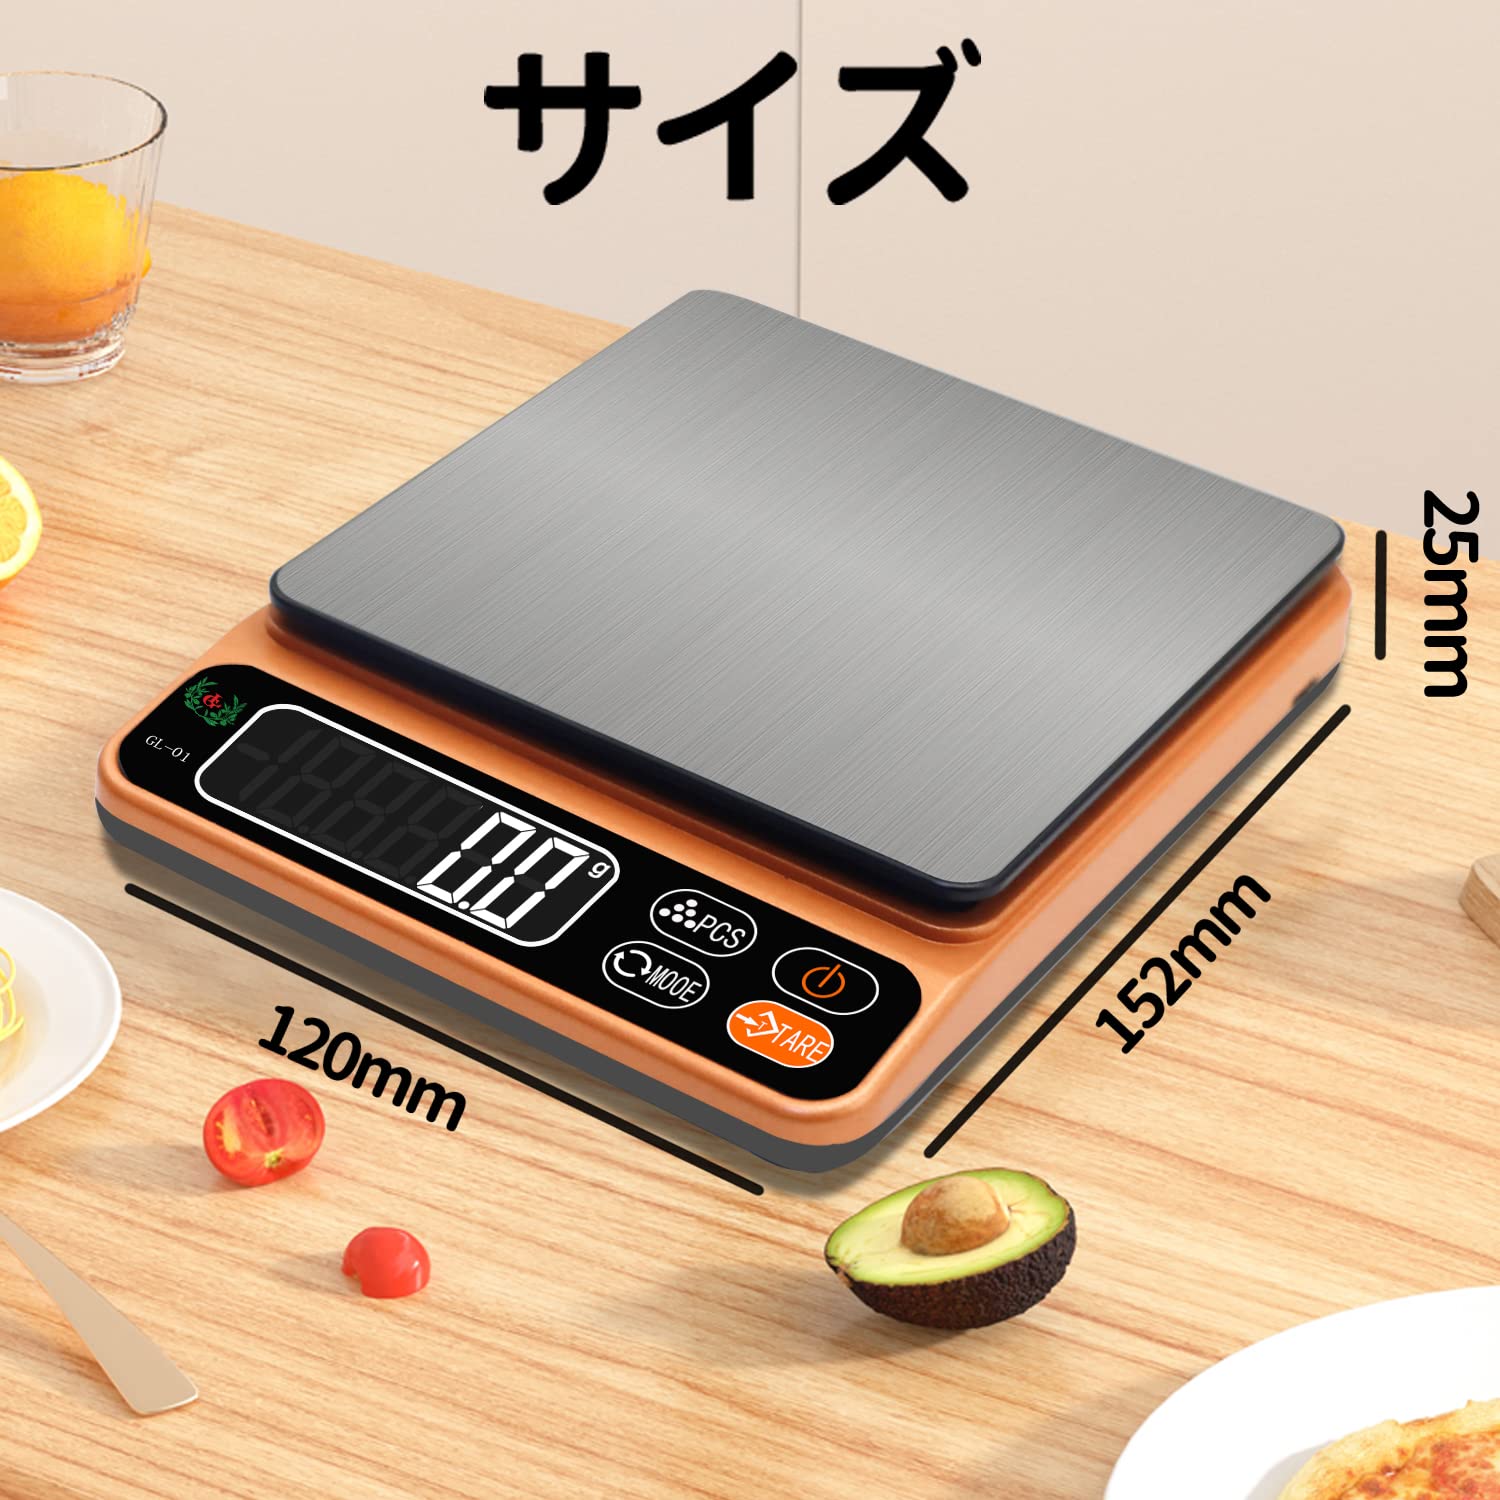 SCALE JAZZ measuring digital scale scale electron scales measuring 5000g 0.1g unit 5kg measure compact amount measurement manner sack discount power supply self 